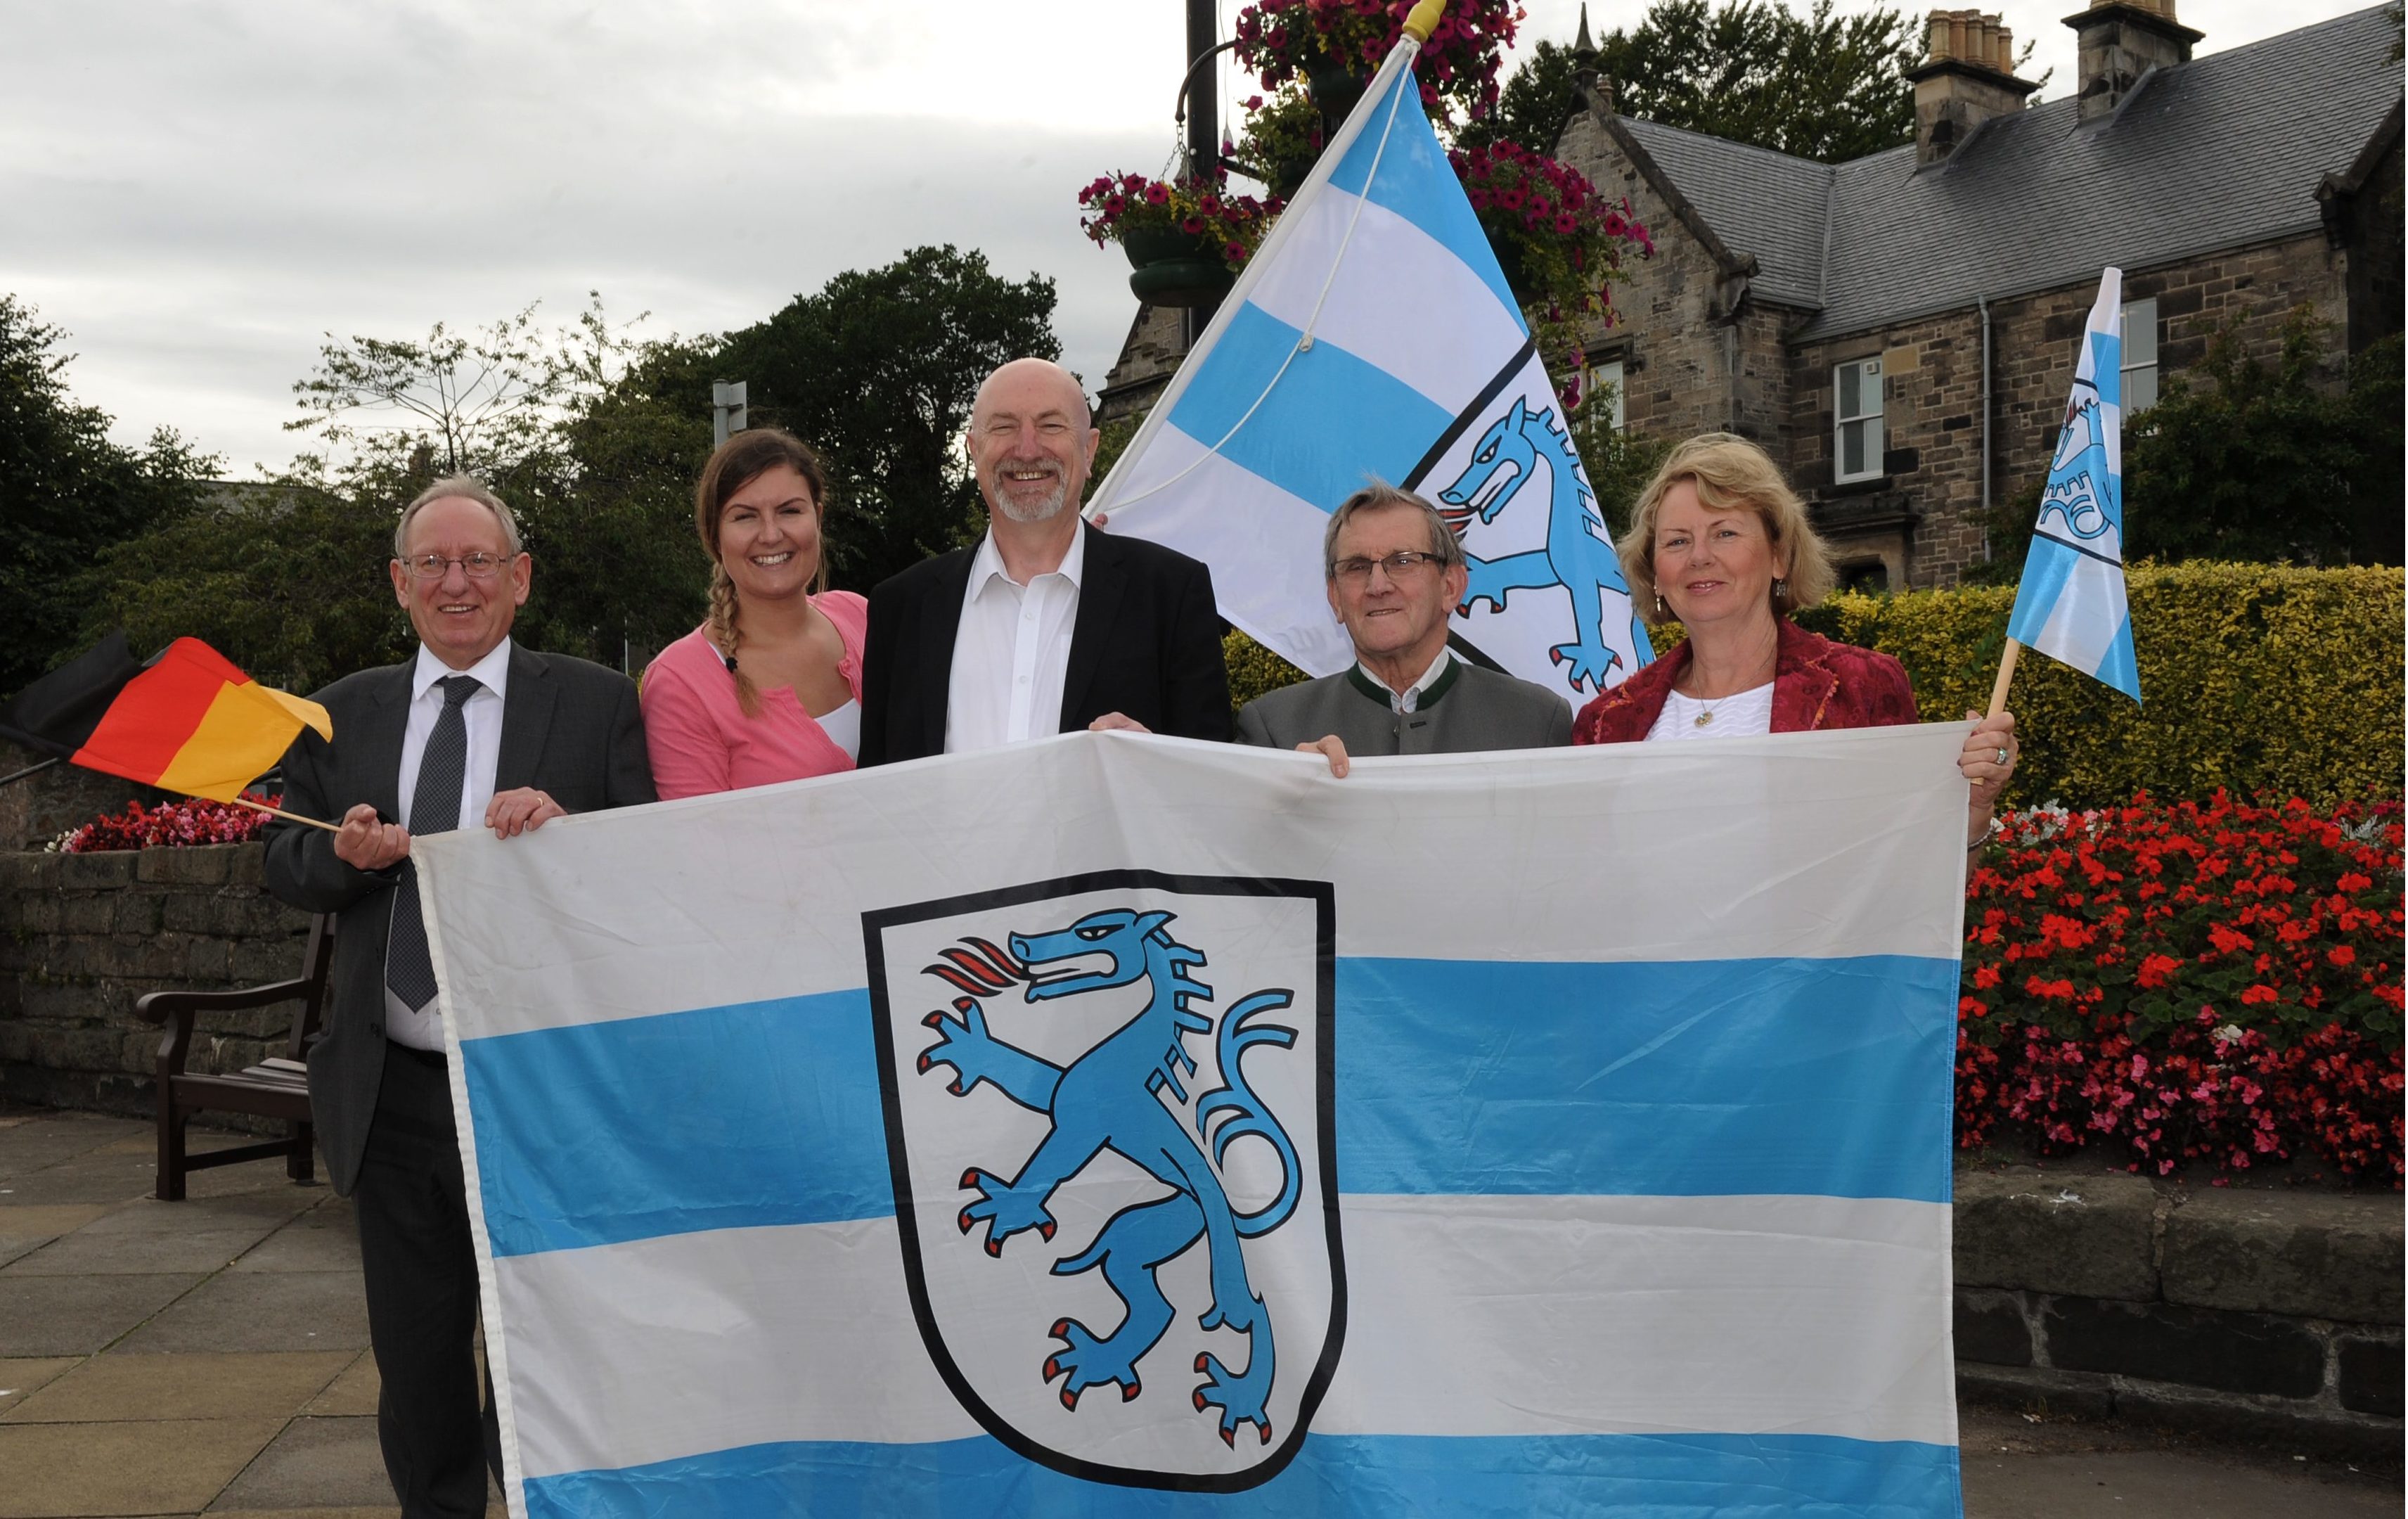 Robert Main from the Kirkcaldy Ingolstadt Association, left, with Linda Pearce, Cllr Neil crooks, Jim Cooper and Joey Cottrell.